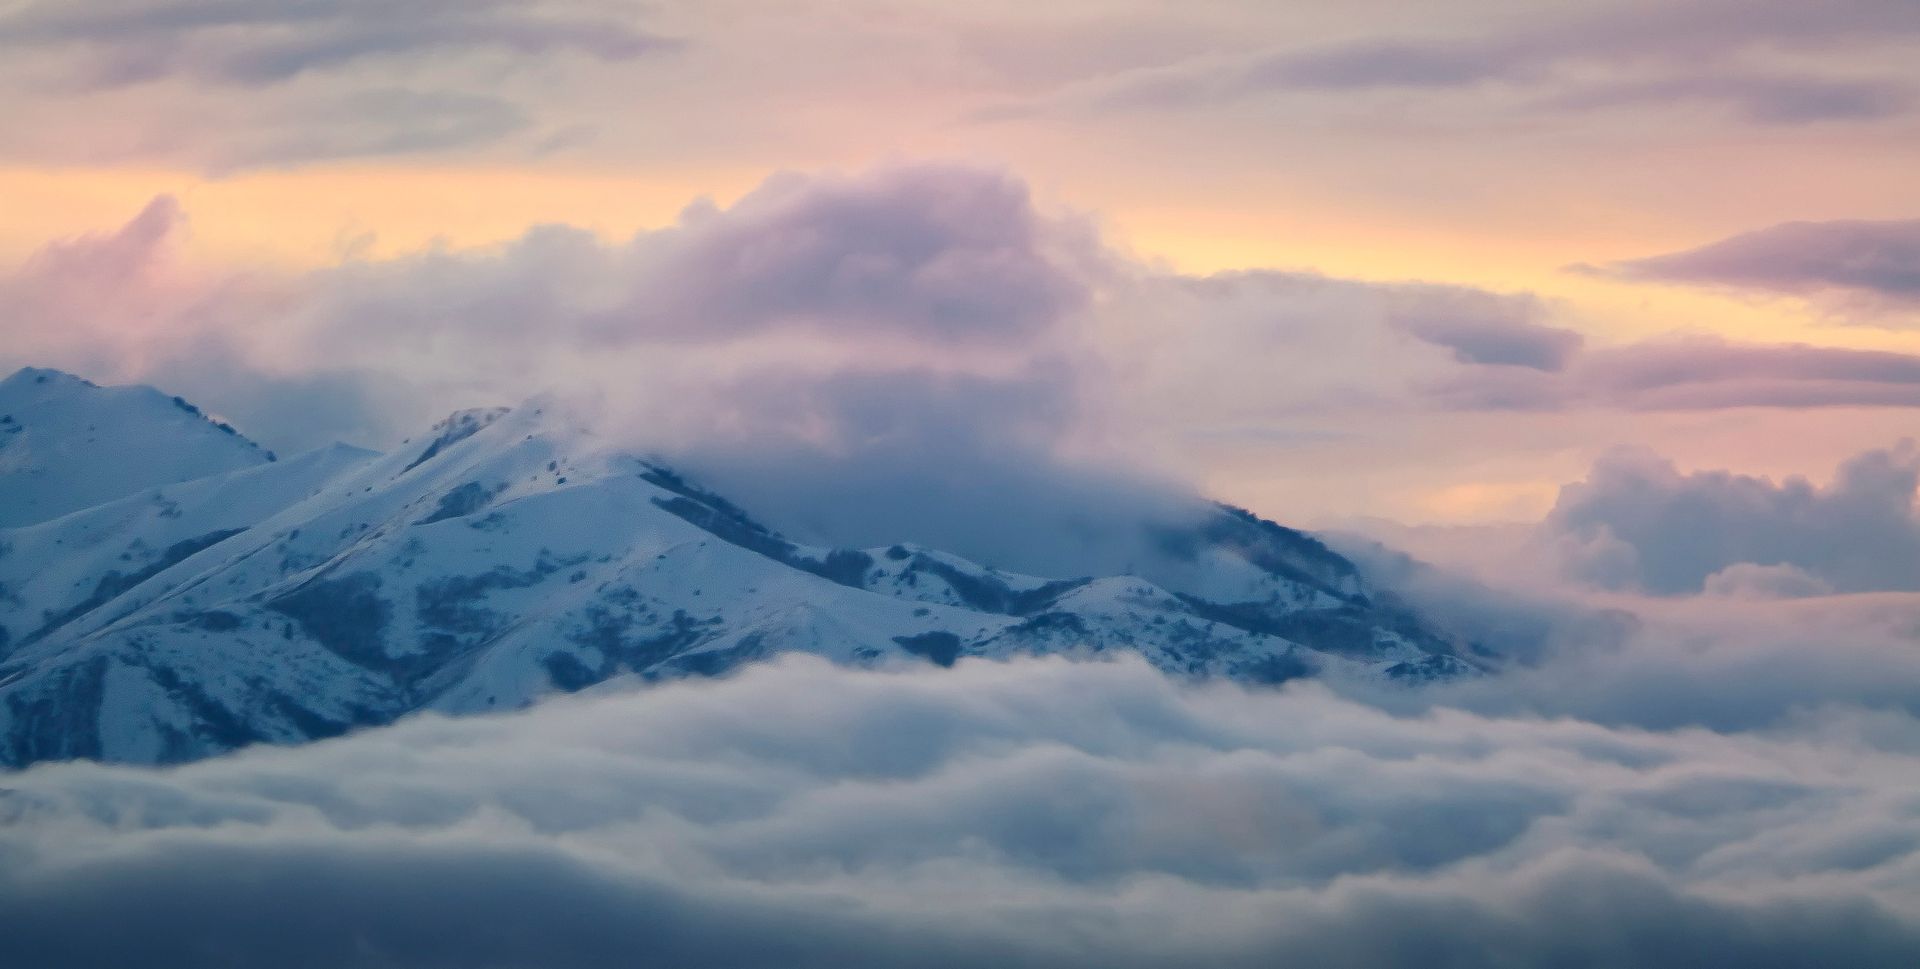 A snow-covered mountain pokes up above a layer of soft clouds as the sun sets.